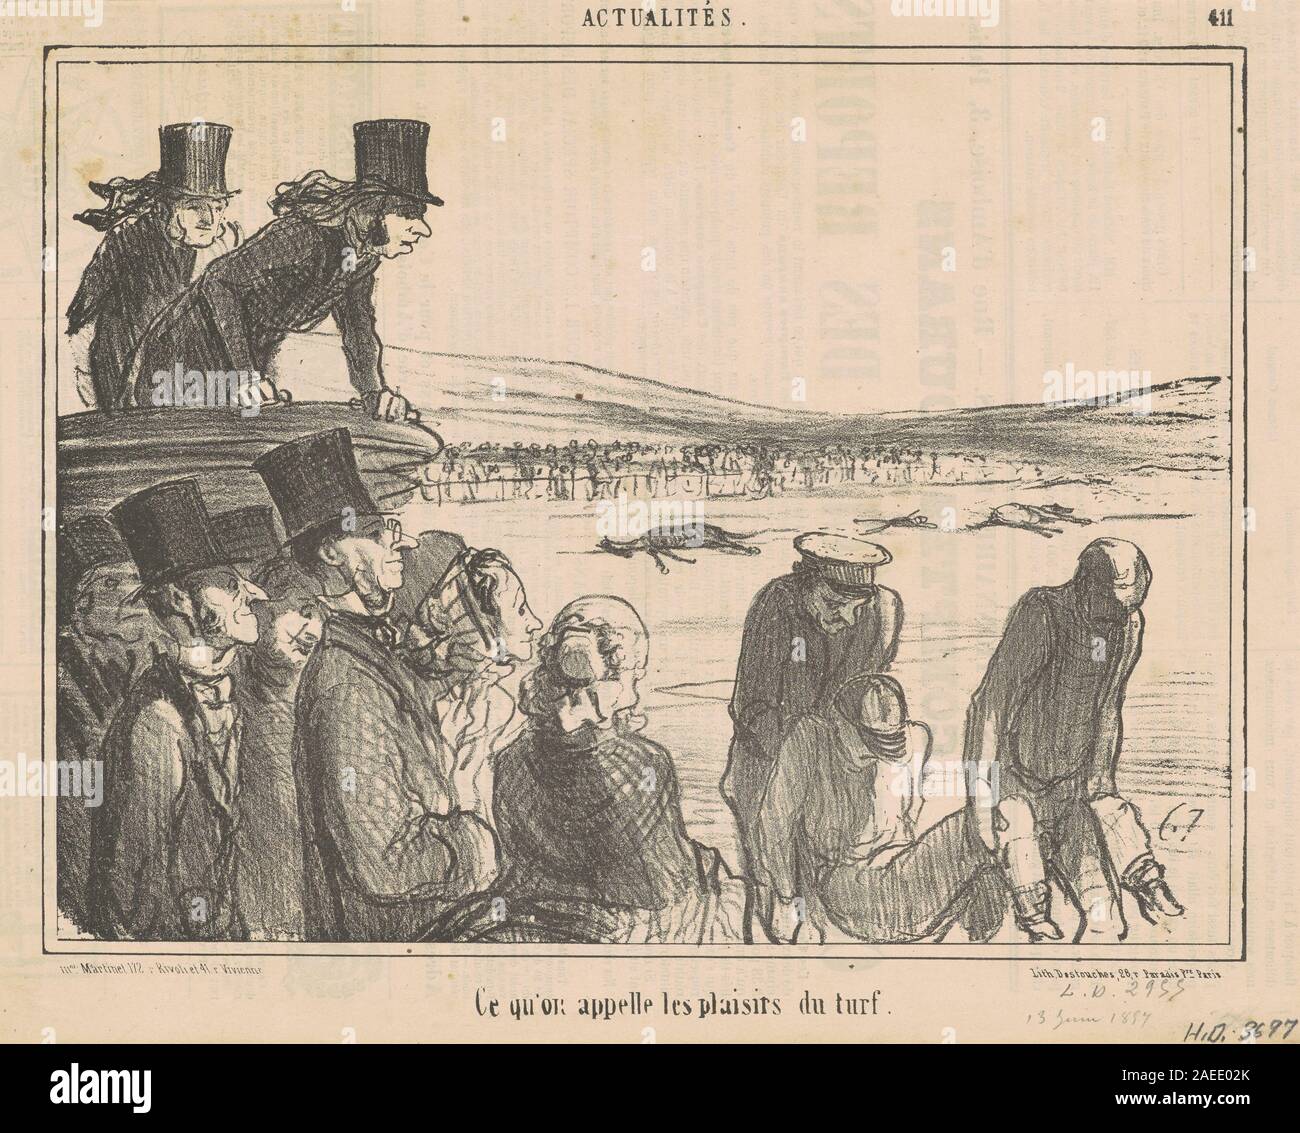 Honoré Daumier, Ce qu'on appelle les plasirs du turf, 19th century Ce qu'on appelle les plasirs du turf; 19th century date Stock Photo